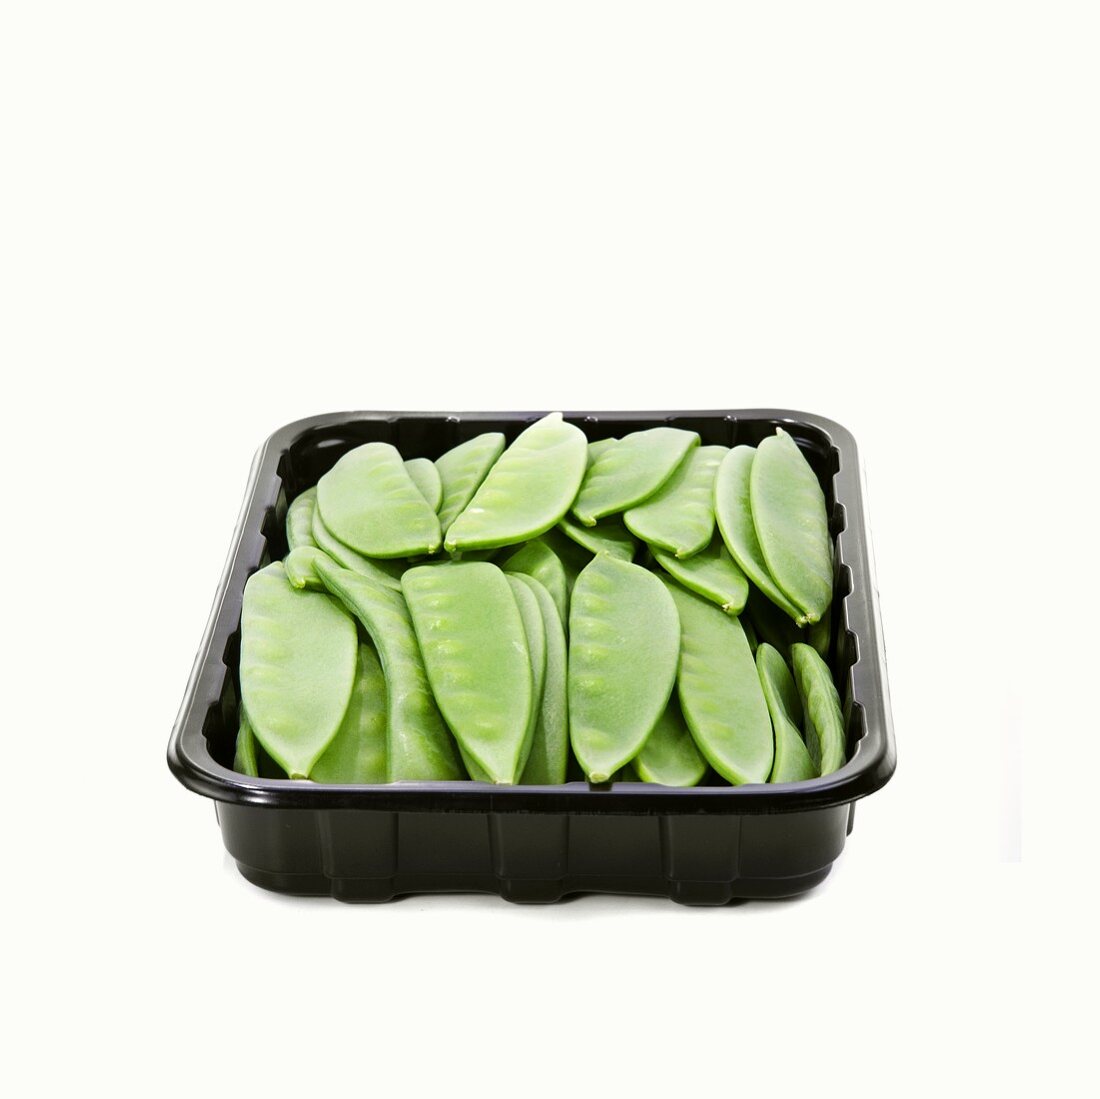 Mangetout in a plastic tray